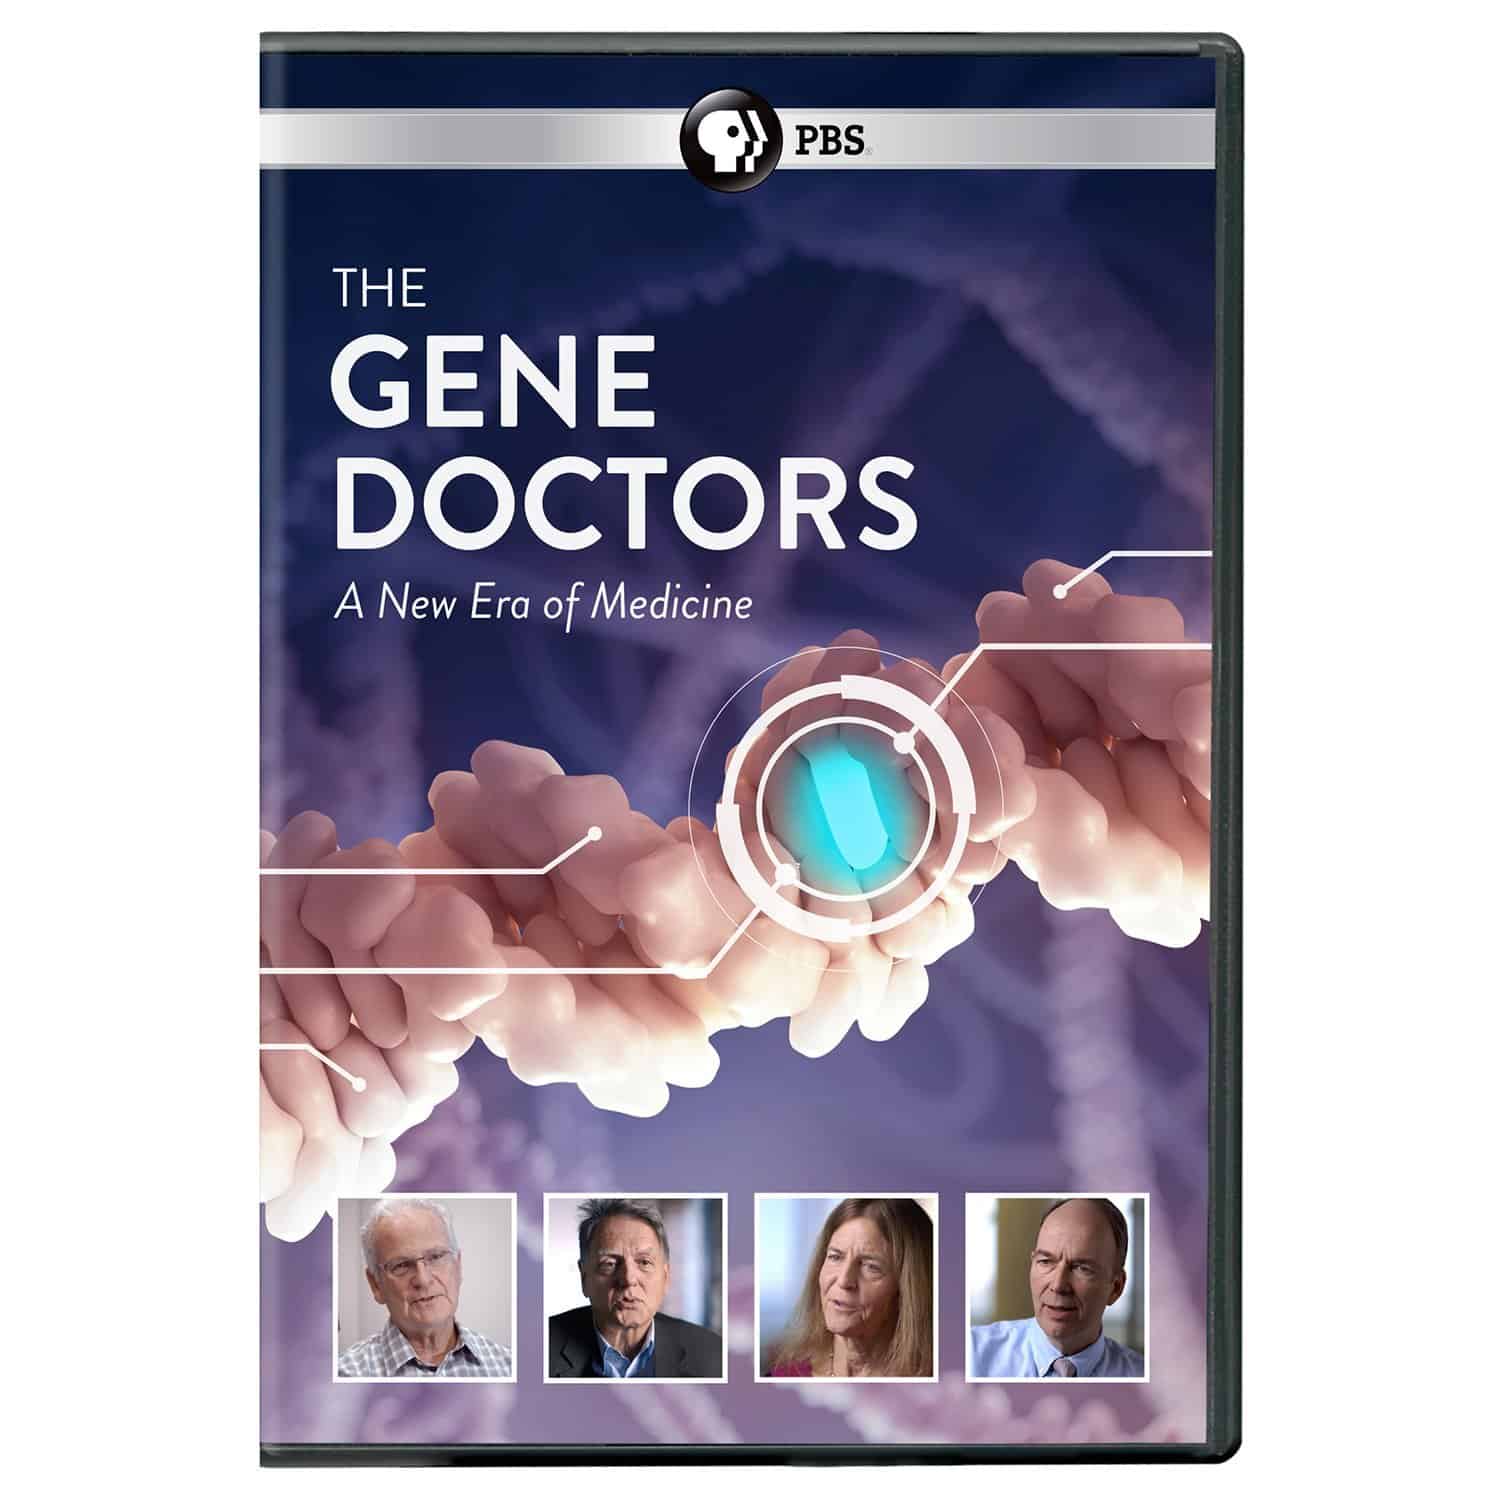 The Gene Doctors: A New Era of Medicine DVD Review